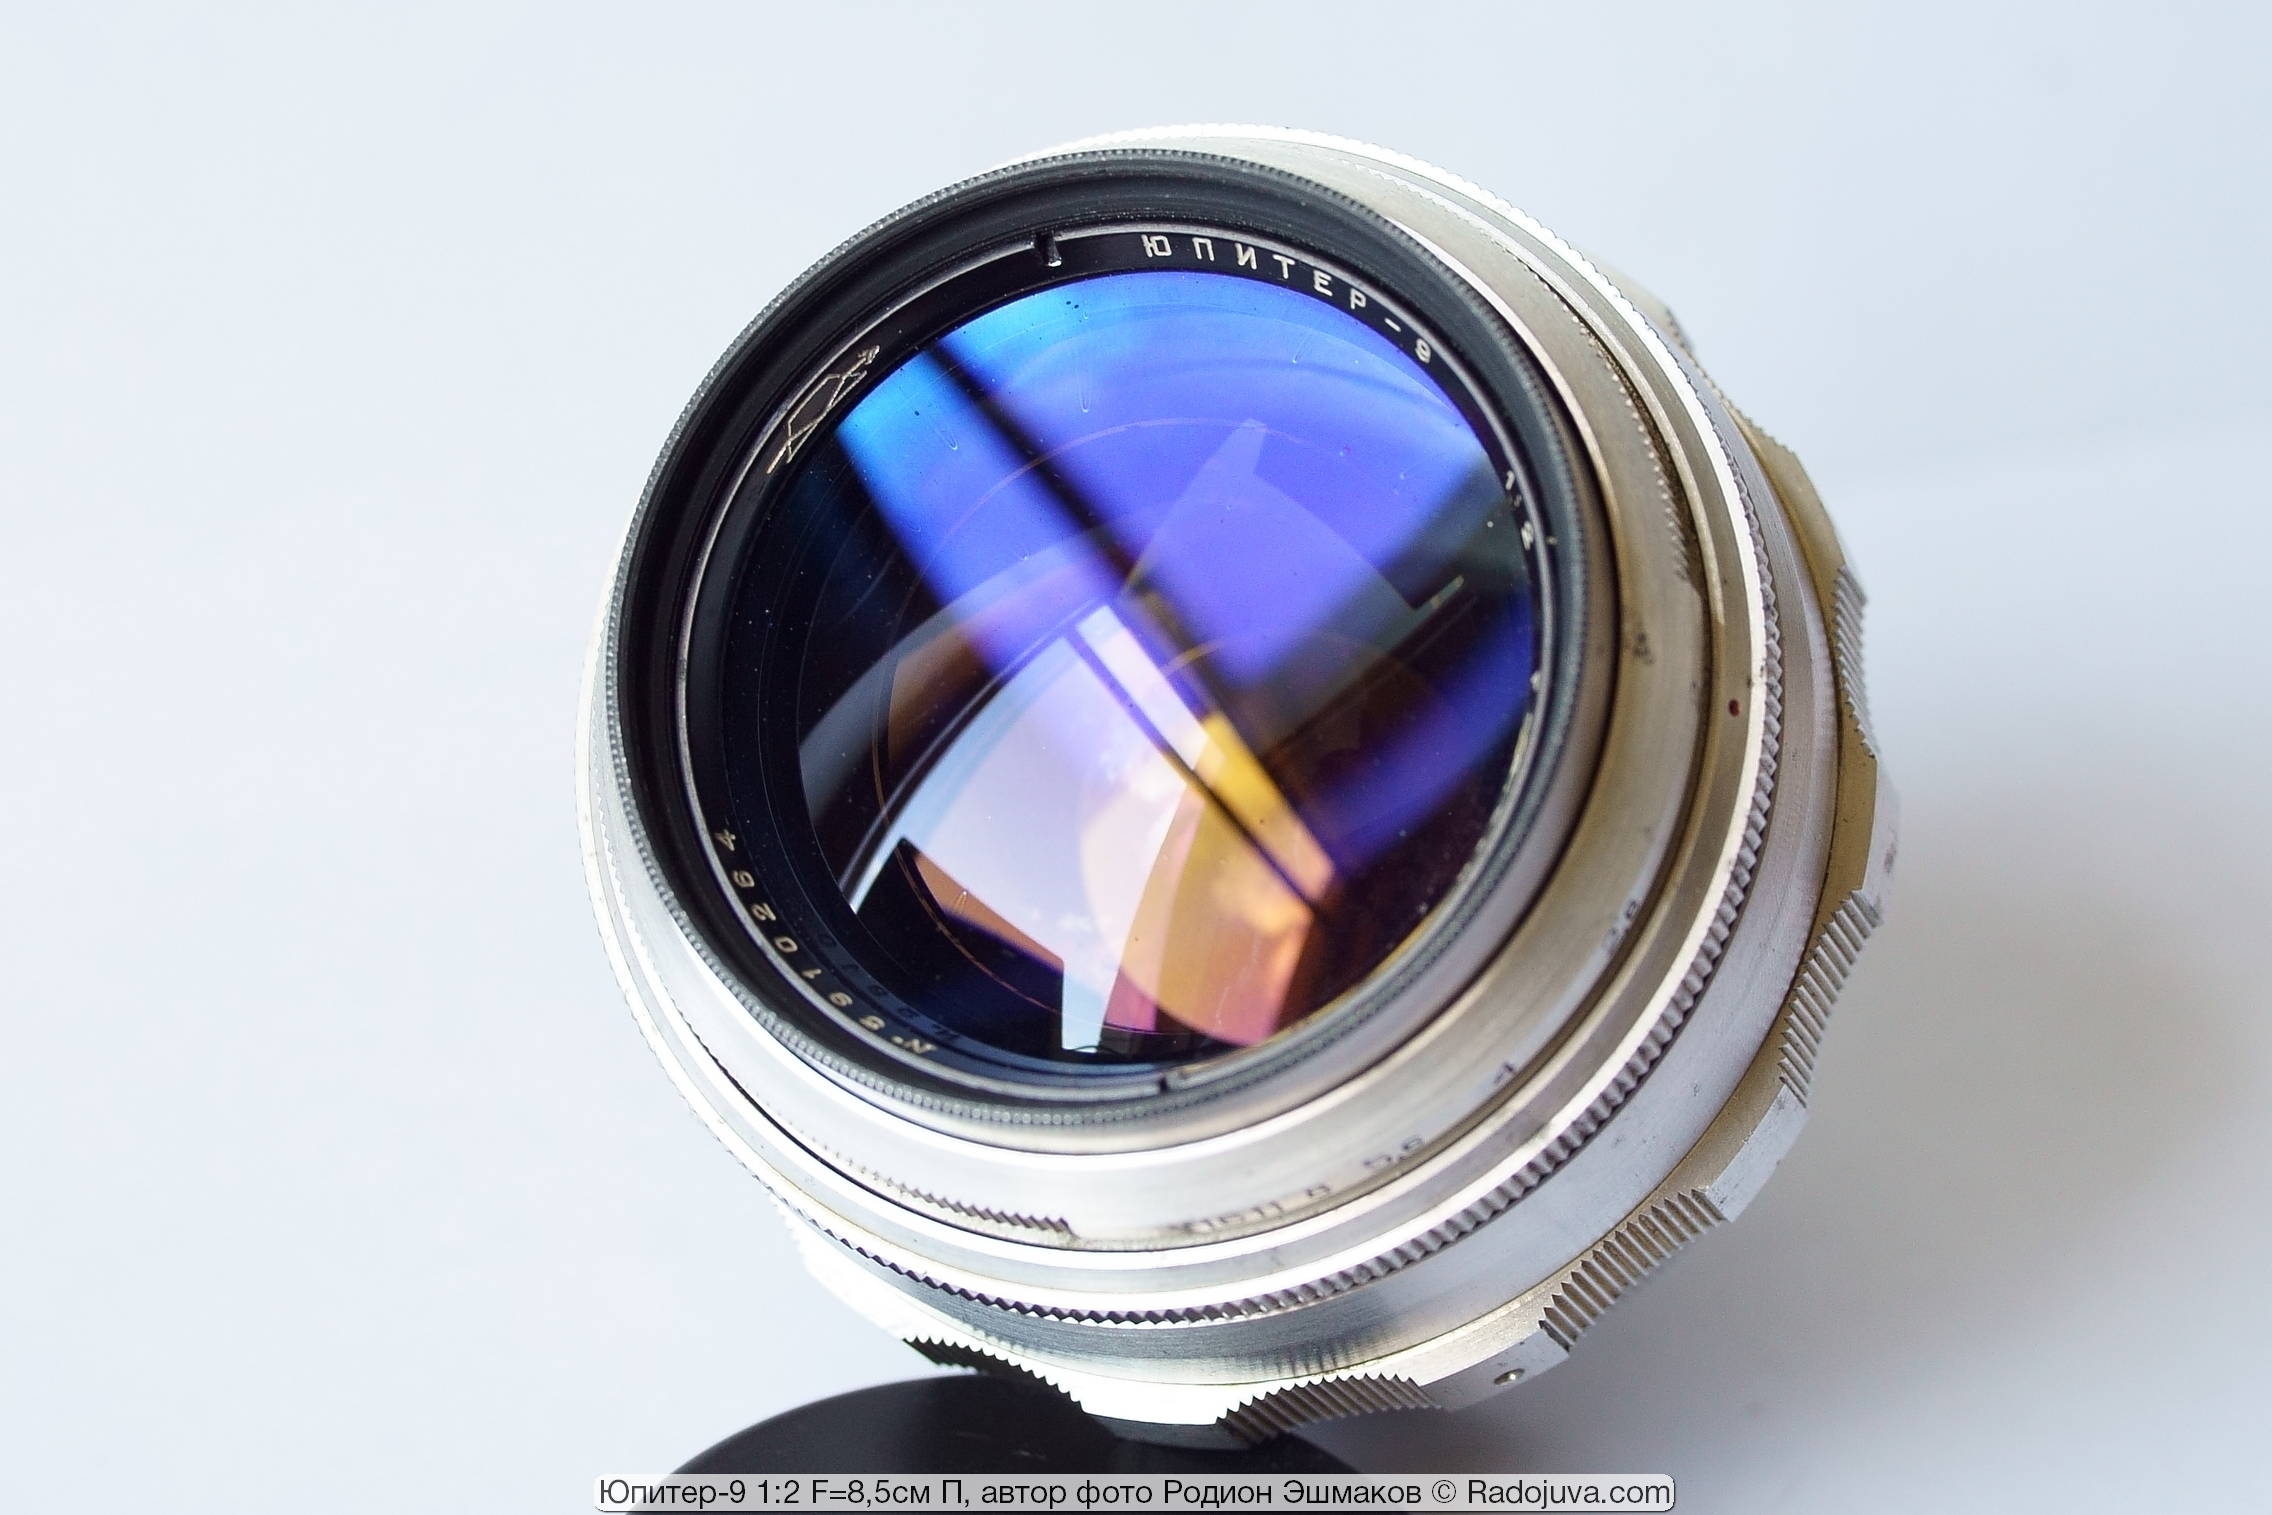 The view of the large convex front lens of the Jupiter-9 objective is quite aesthetic.